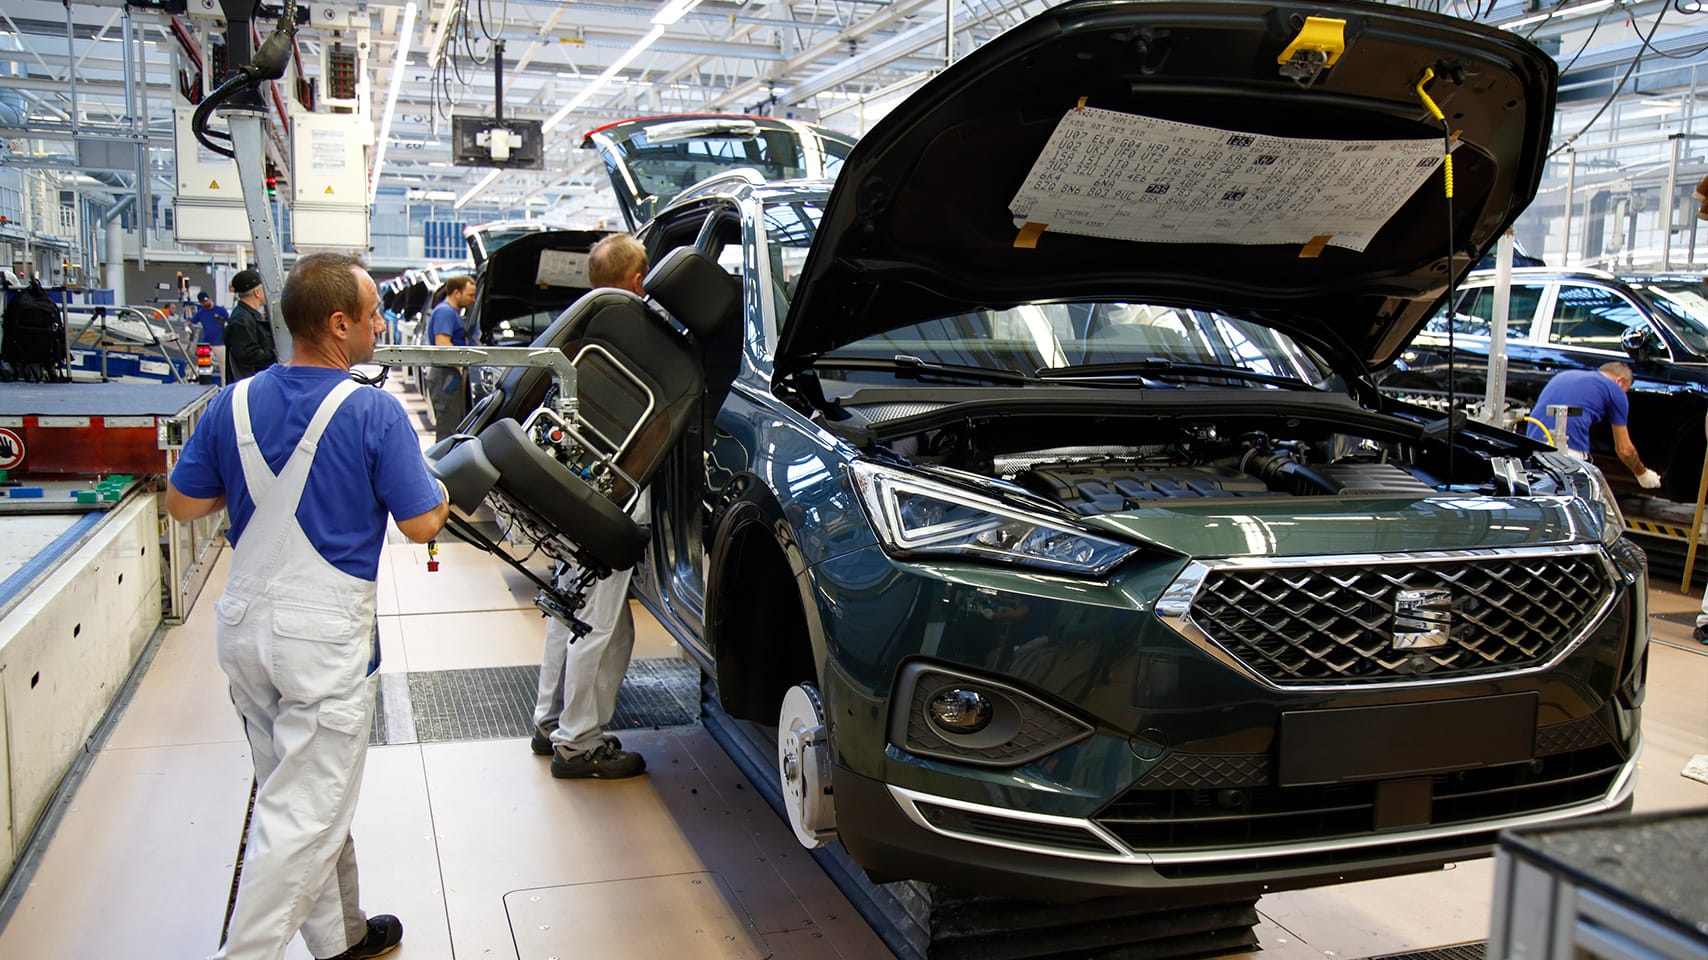 Production starts on SEAT Tarraco large SUV in Wolfsburg